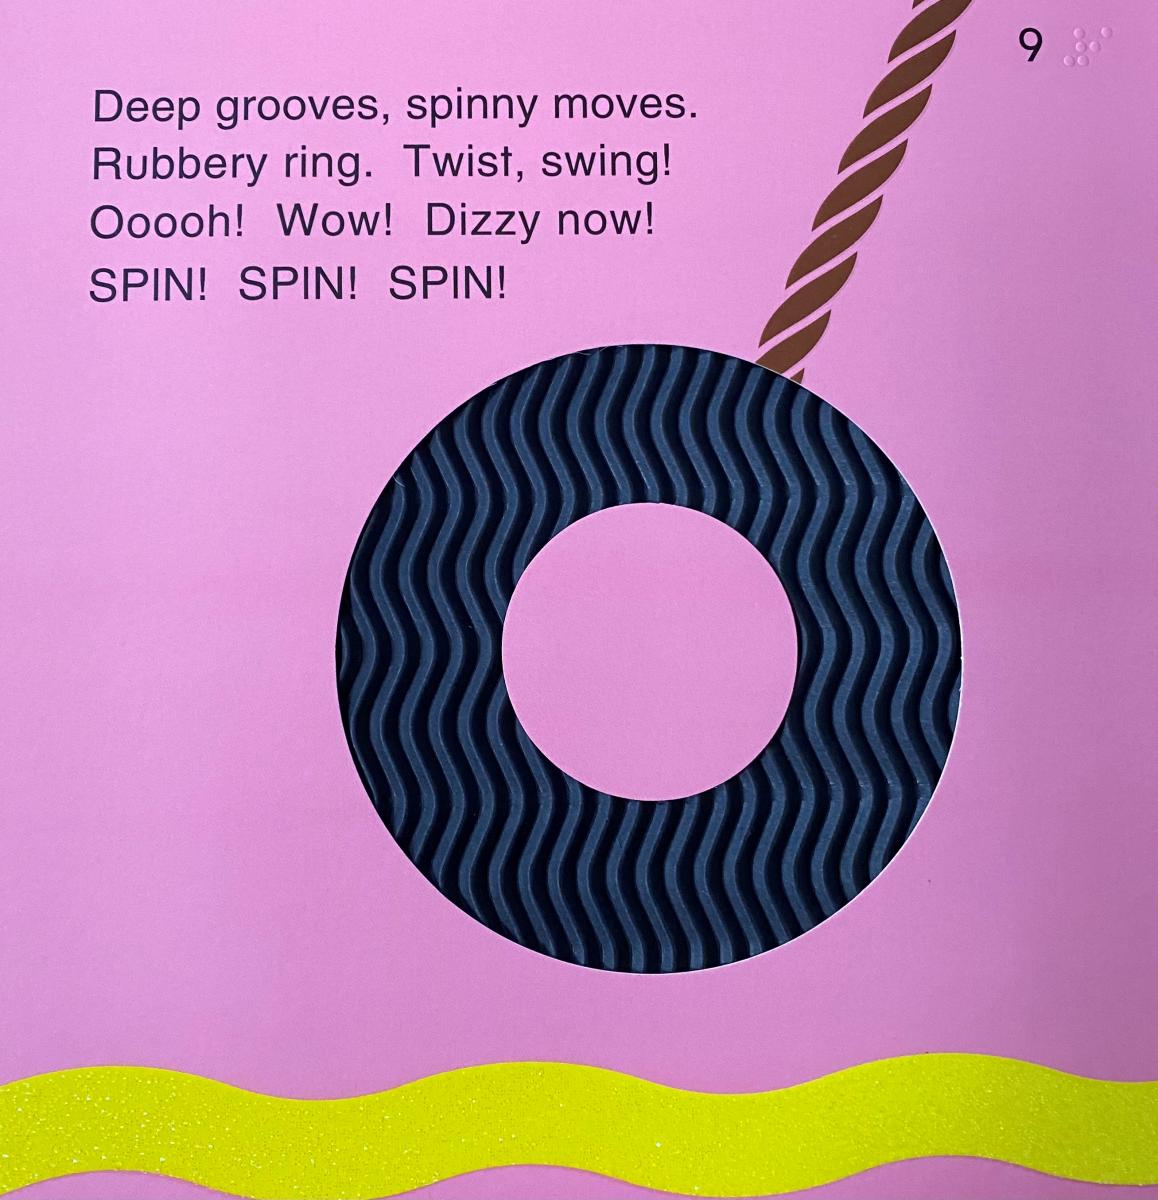 page 9 of the book with a textured tire swing